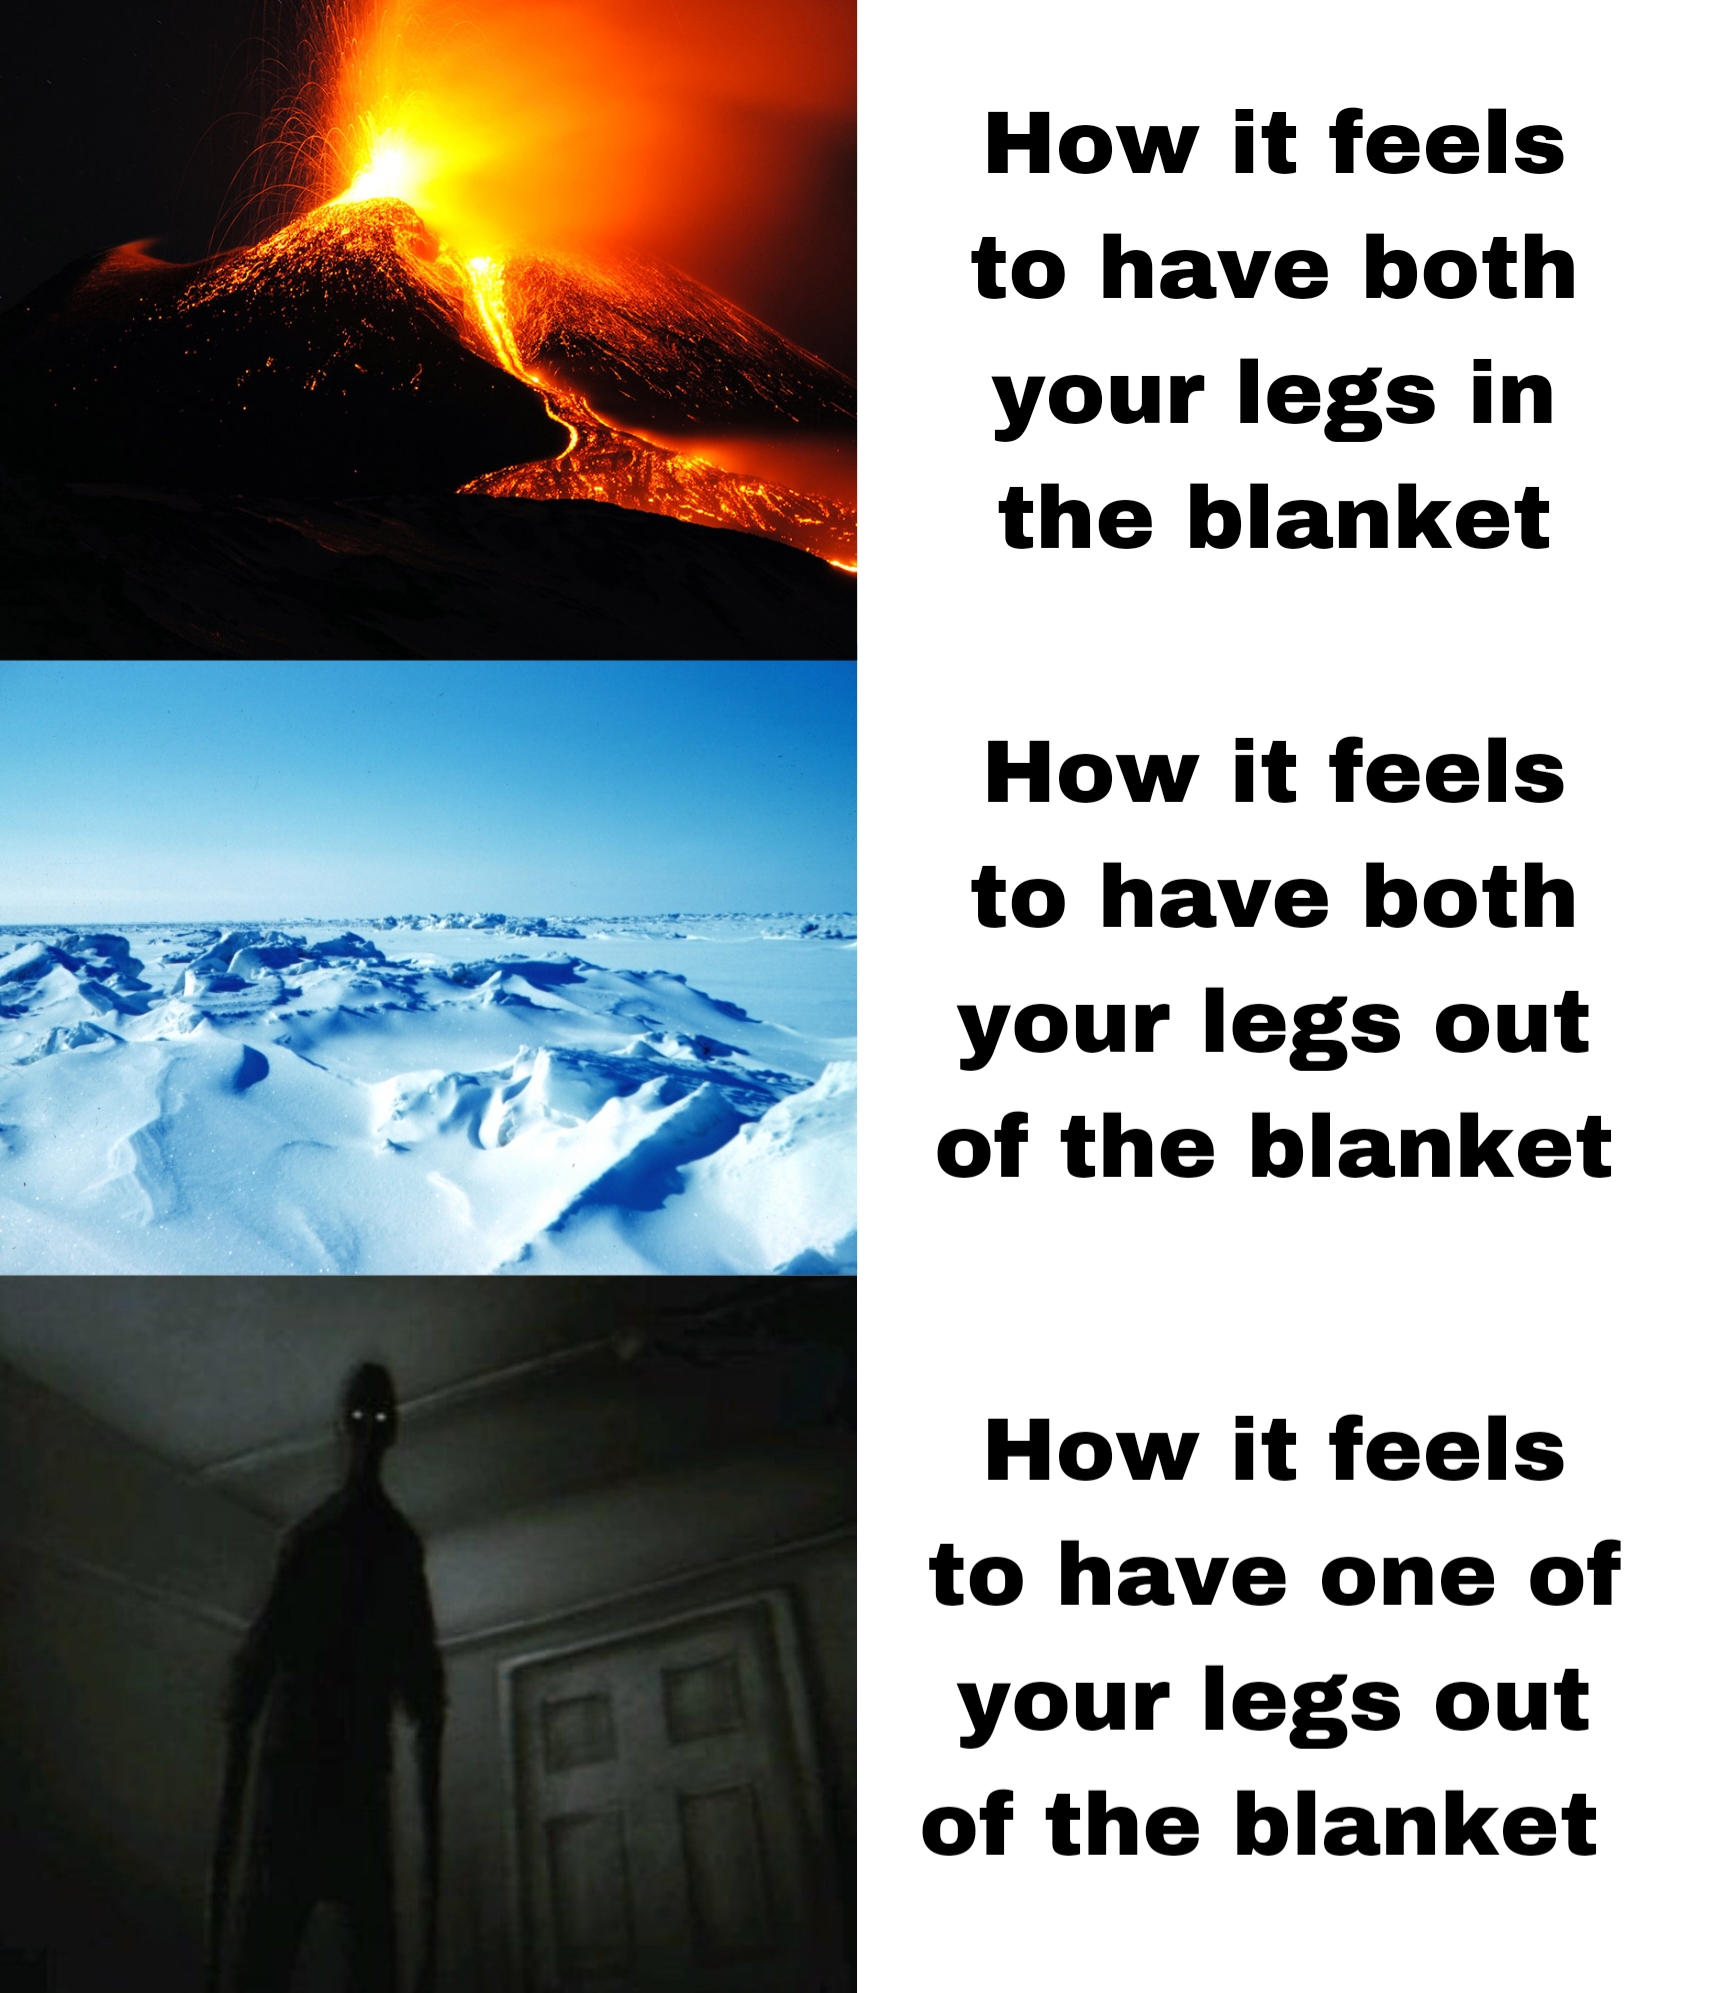 dank memes - ice - How it feels to have both your legs in the blanket How it feels to have both your legs out of the blanket How it feels to have one of your legs out of the blanket